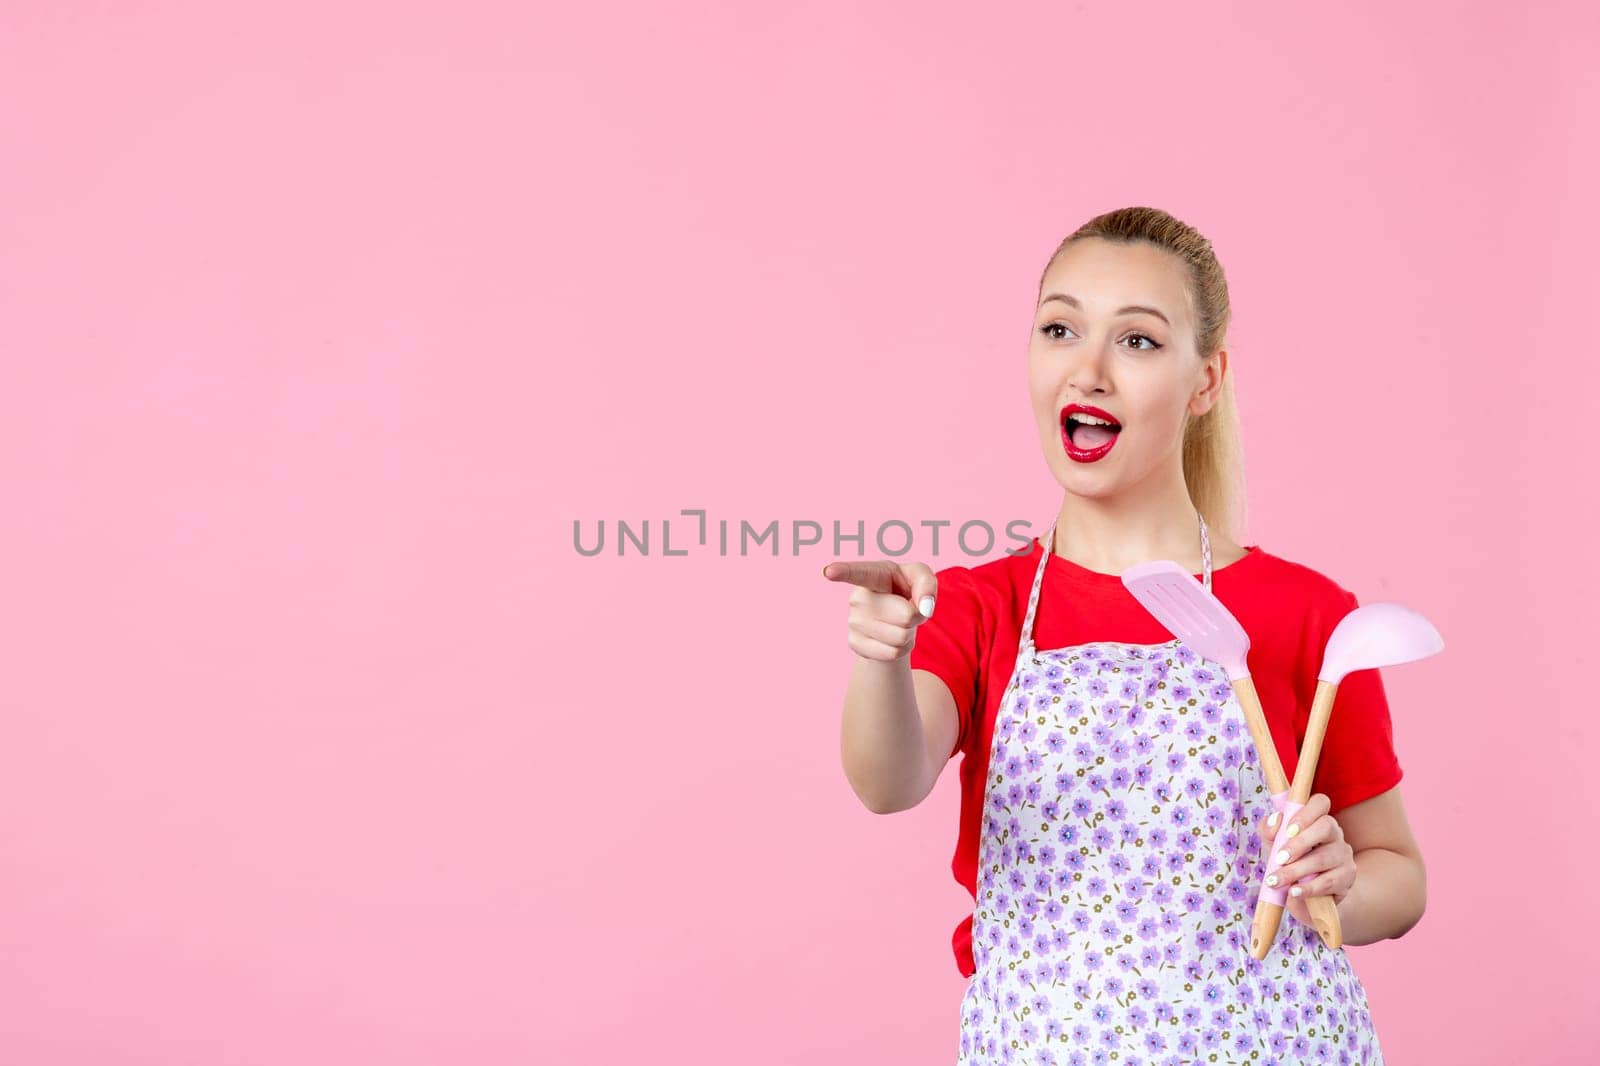 front view young housewife in cape holding spoons and interacting with someone on pink background profession cutlery occupation duty uniform job worker wife